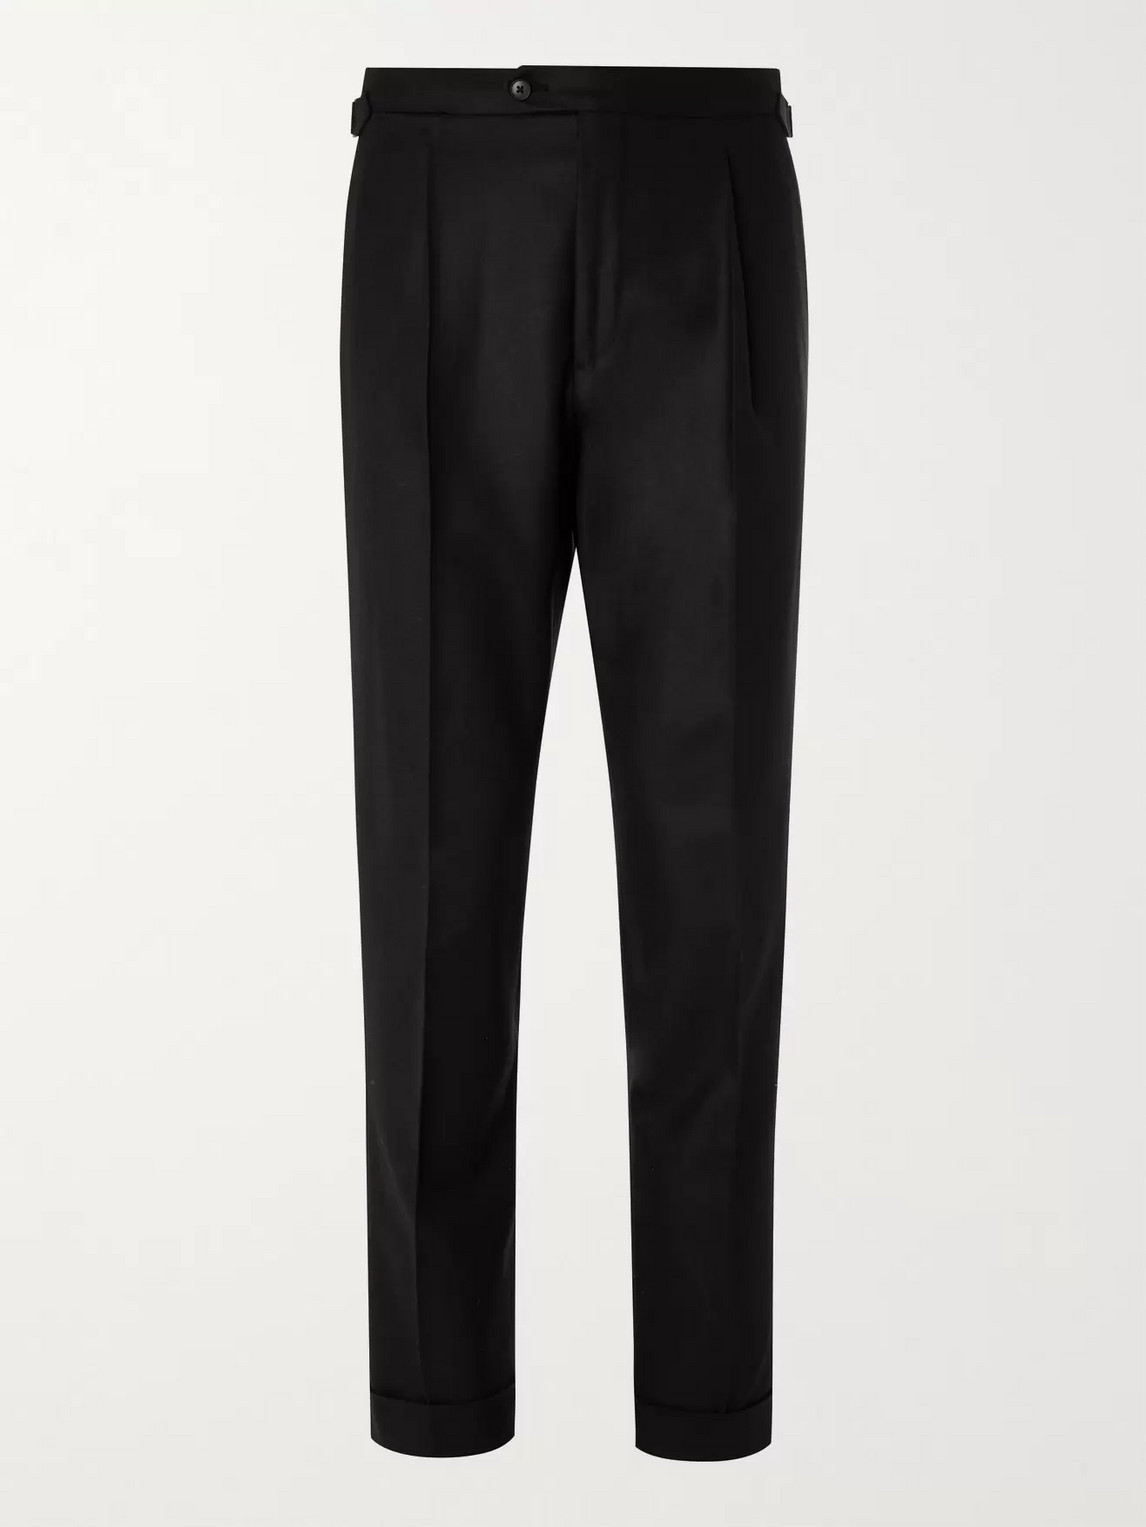 Saman Amel Tapered Wool Trousers In Black